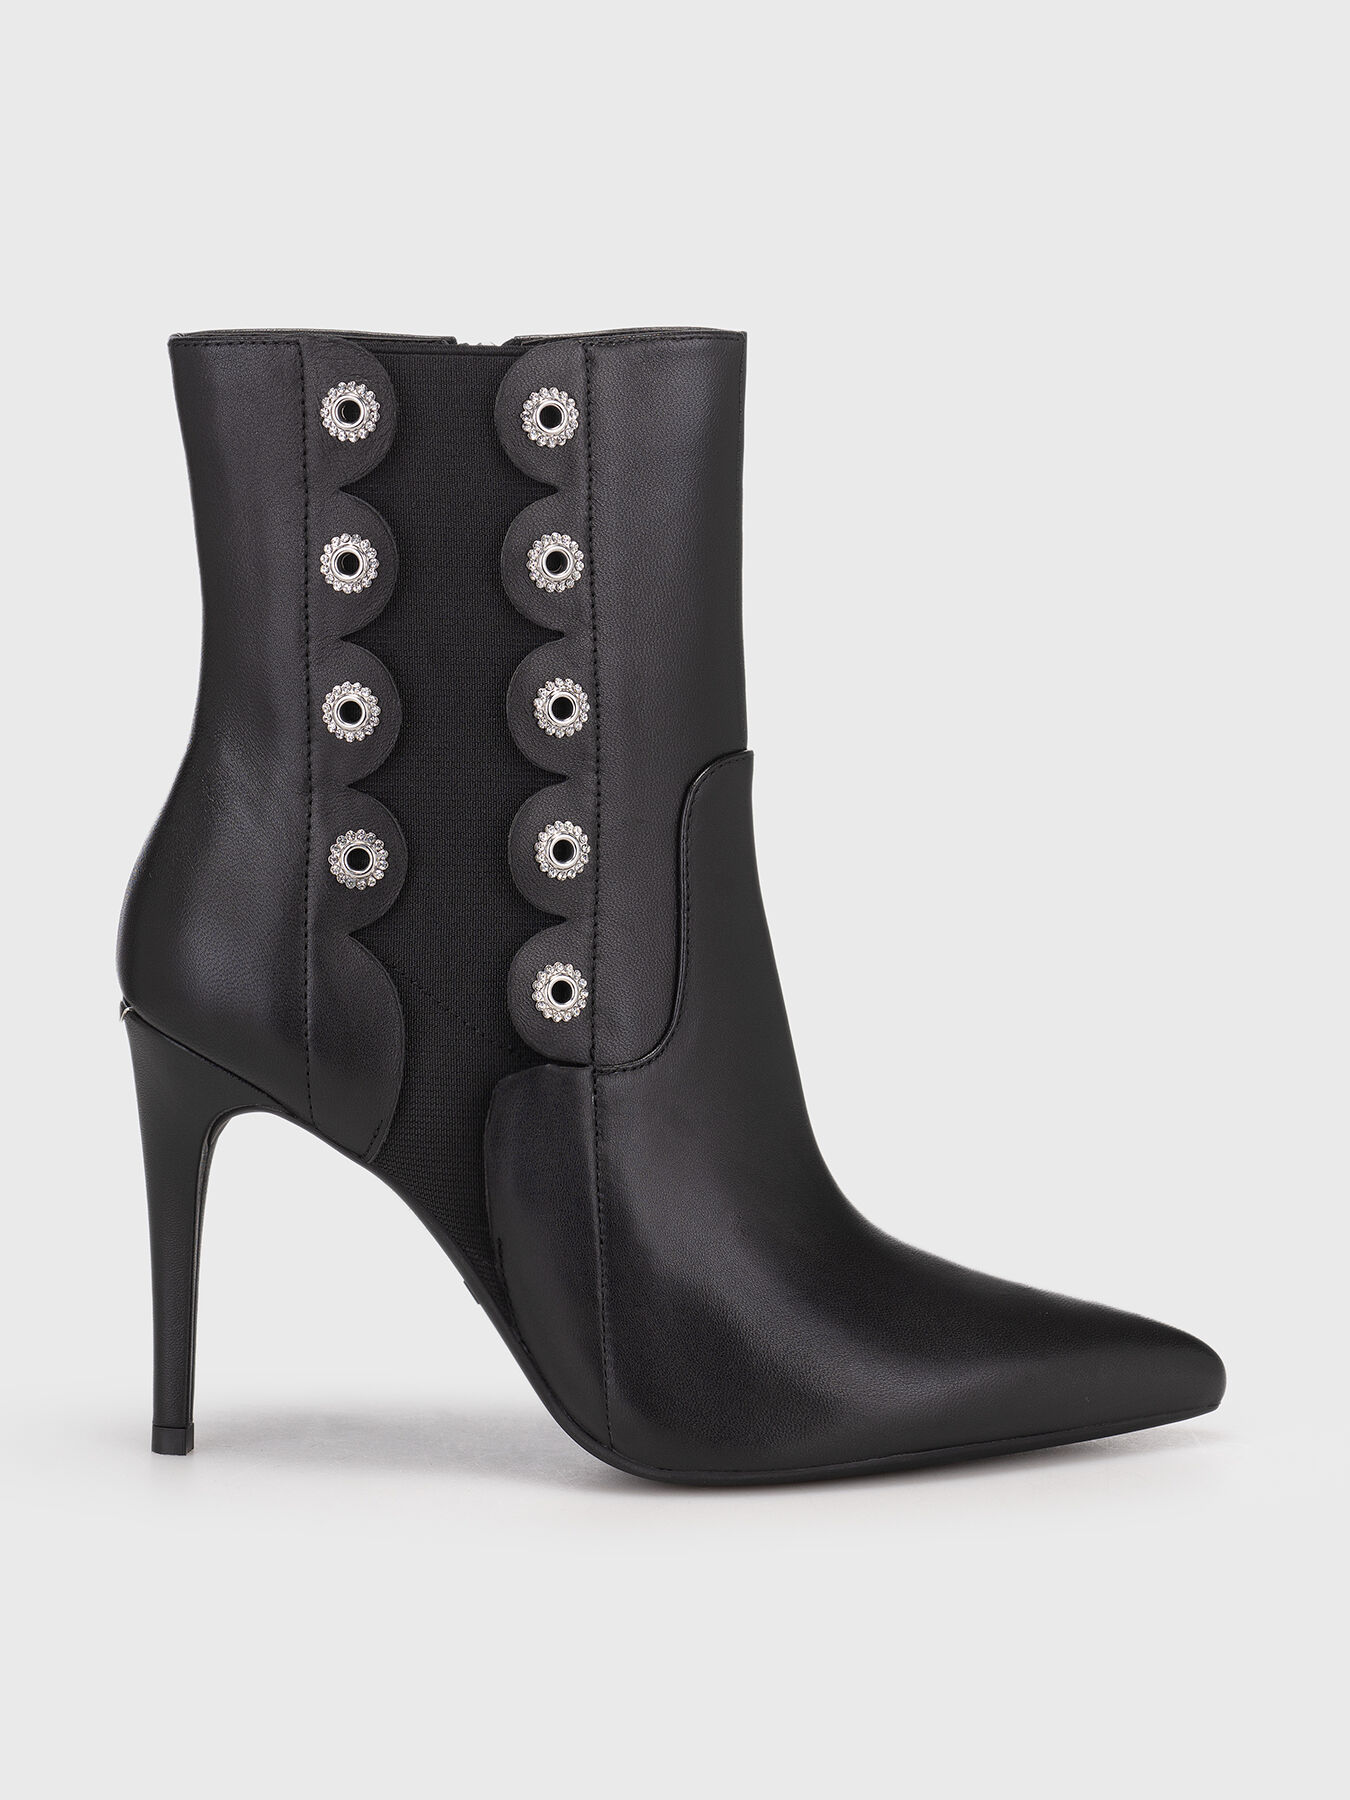 ▷ Women's ankle boots • Platform, heel and casual • Online